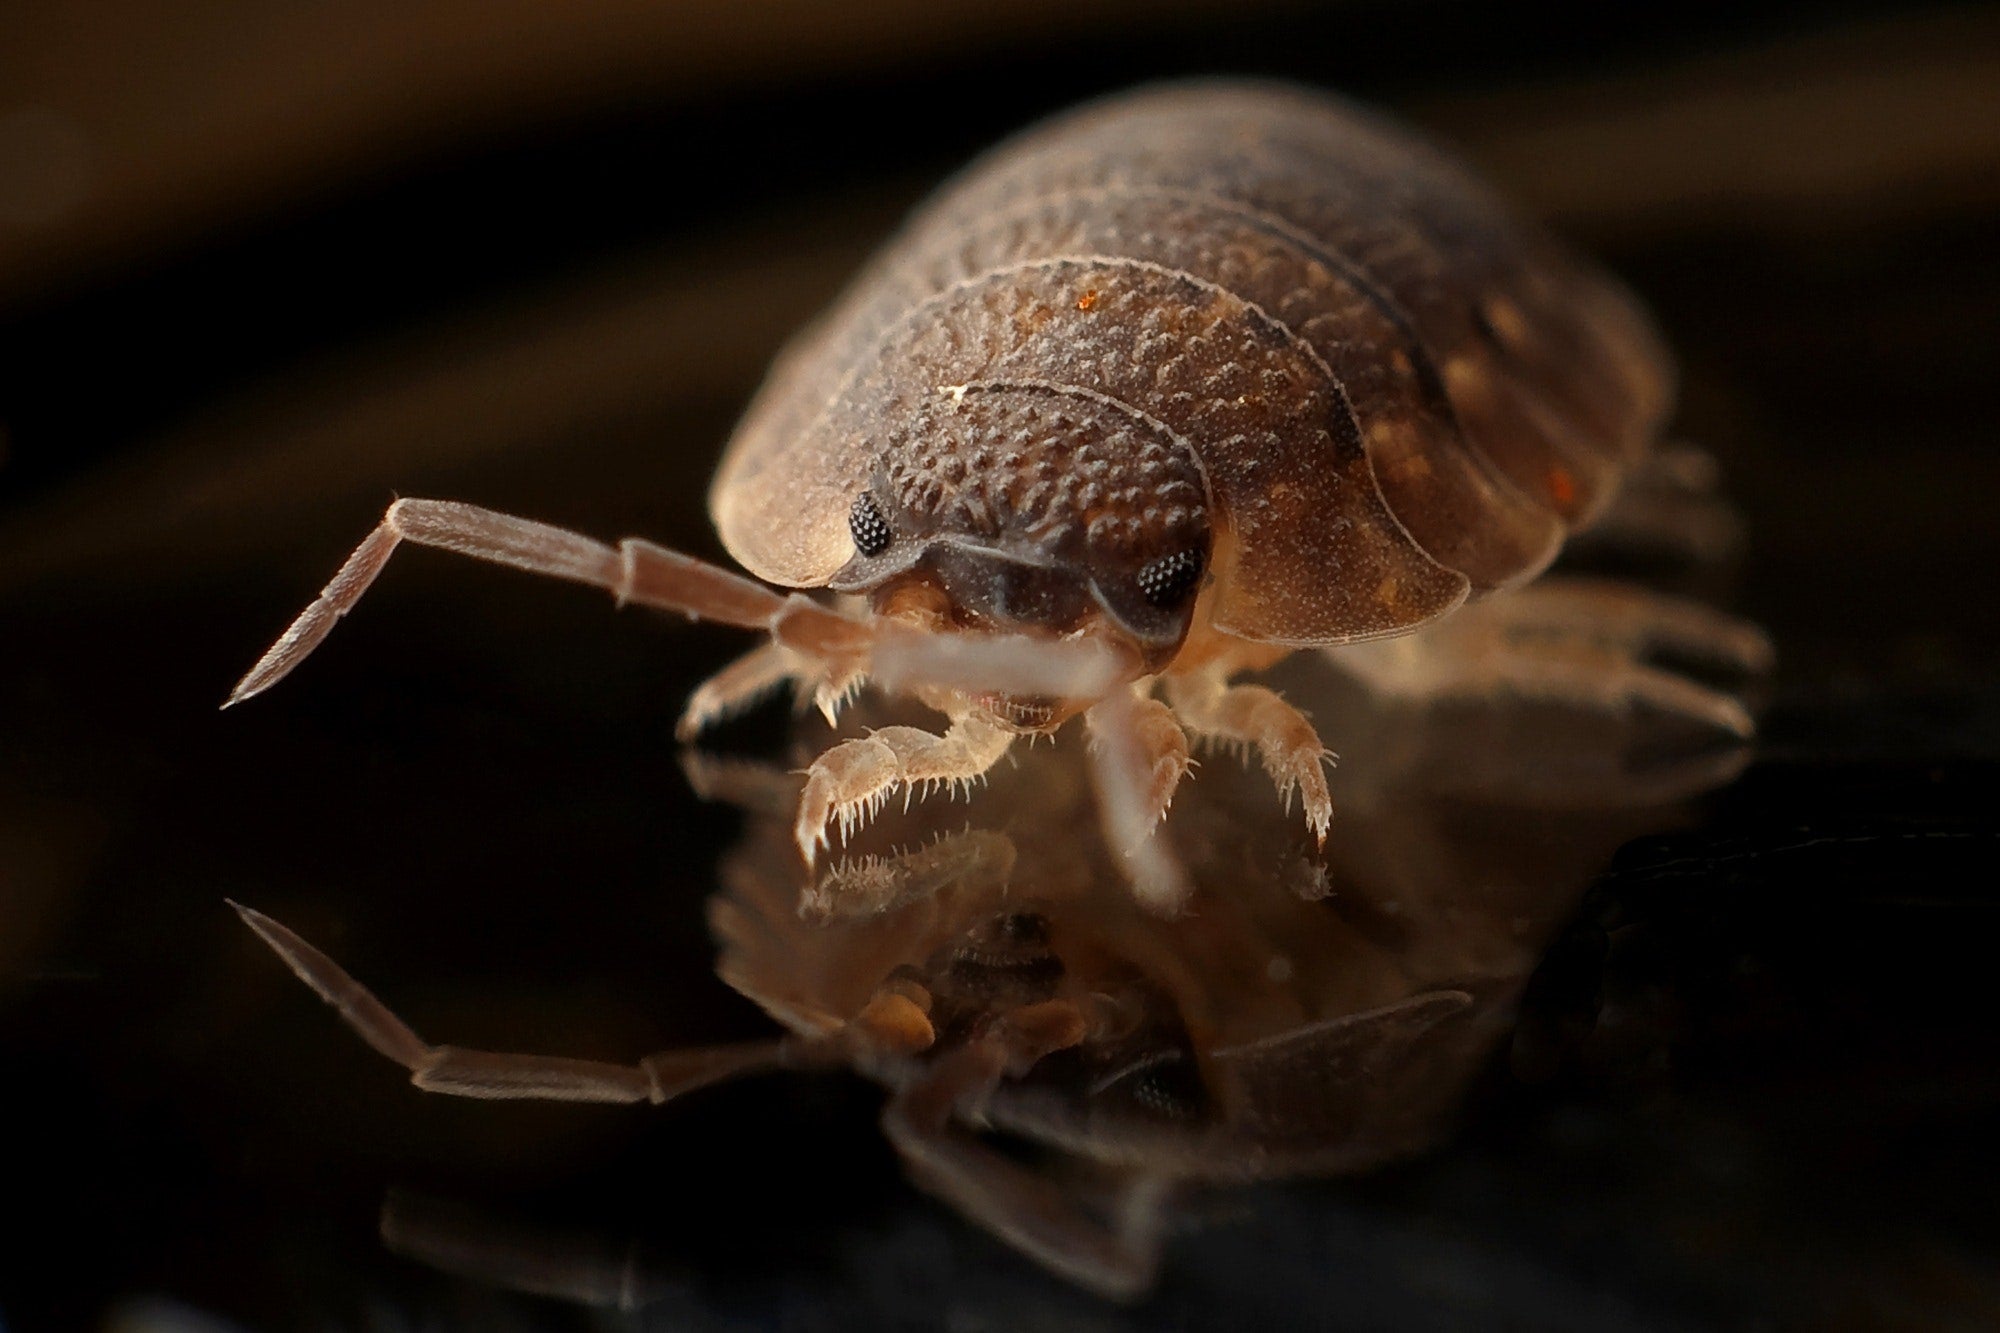 Home Treatment for Bedbugs: 5 DIY Solutions